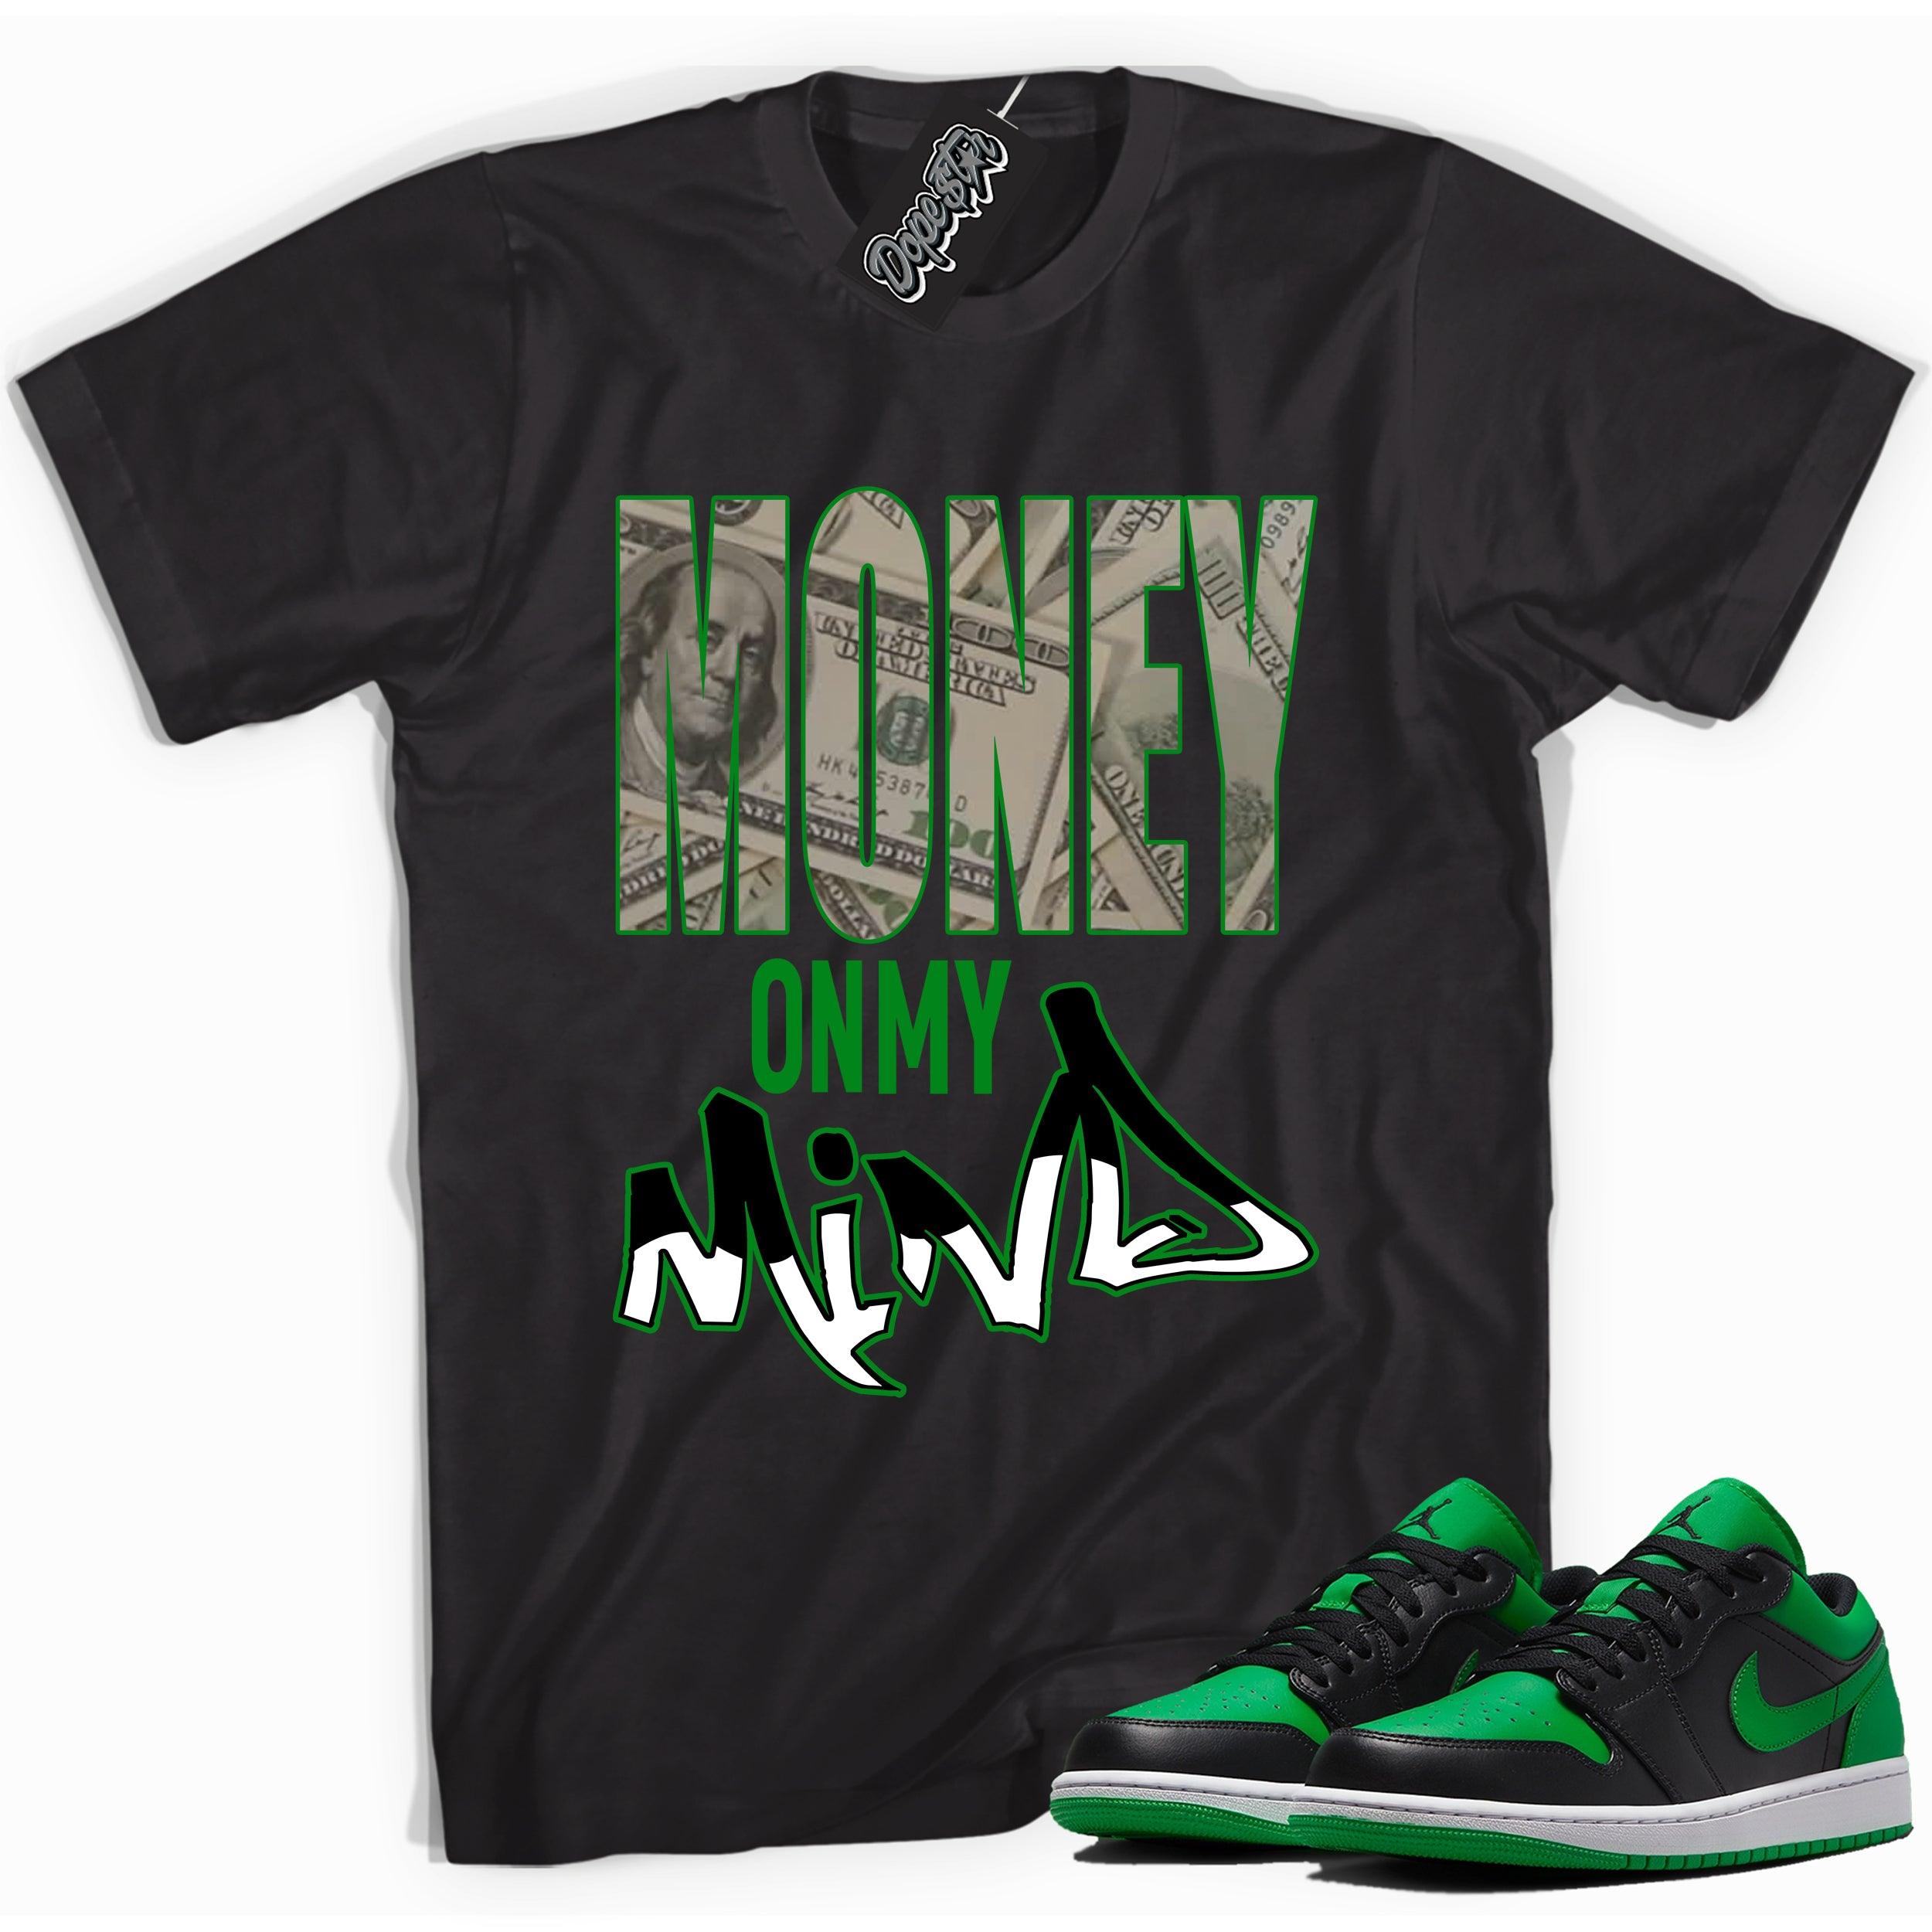 Cool black graphic tee with 'money on my mind' print, that perfectly matches Air Jordan 1 Low Lucky Green sneakers